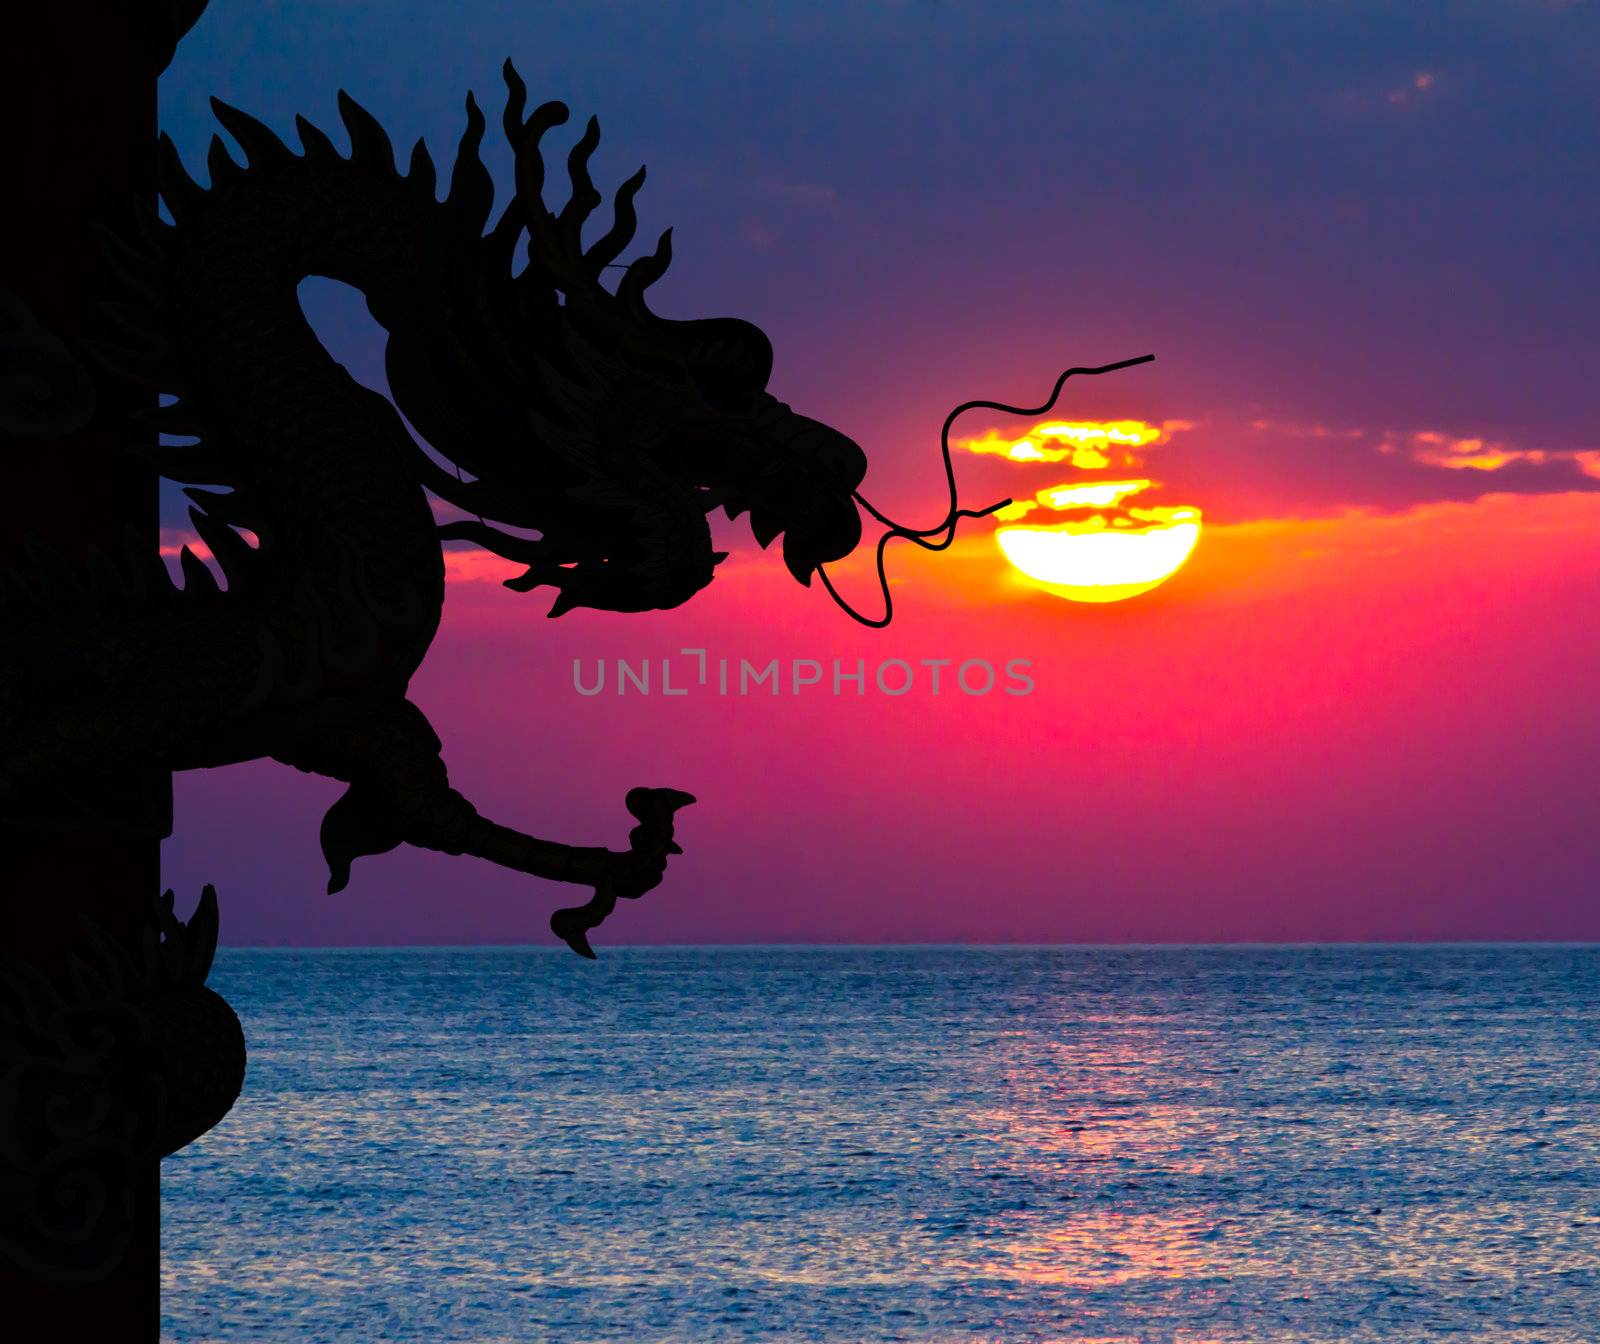 Dragon silhouette and sunset in the sea